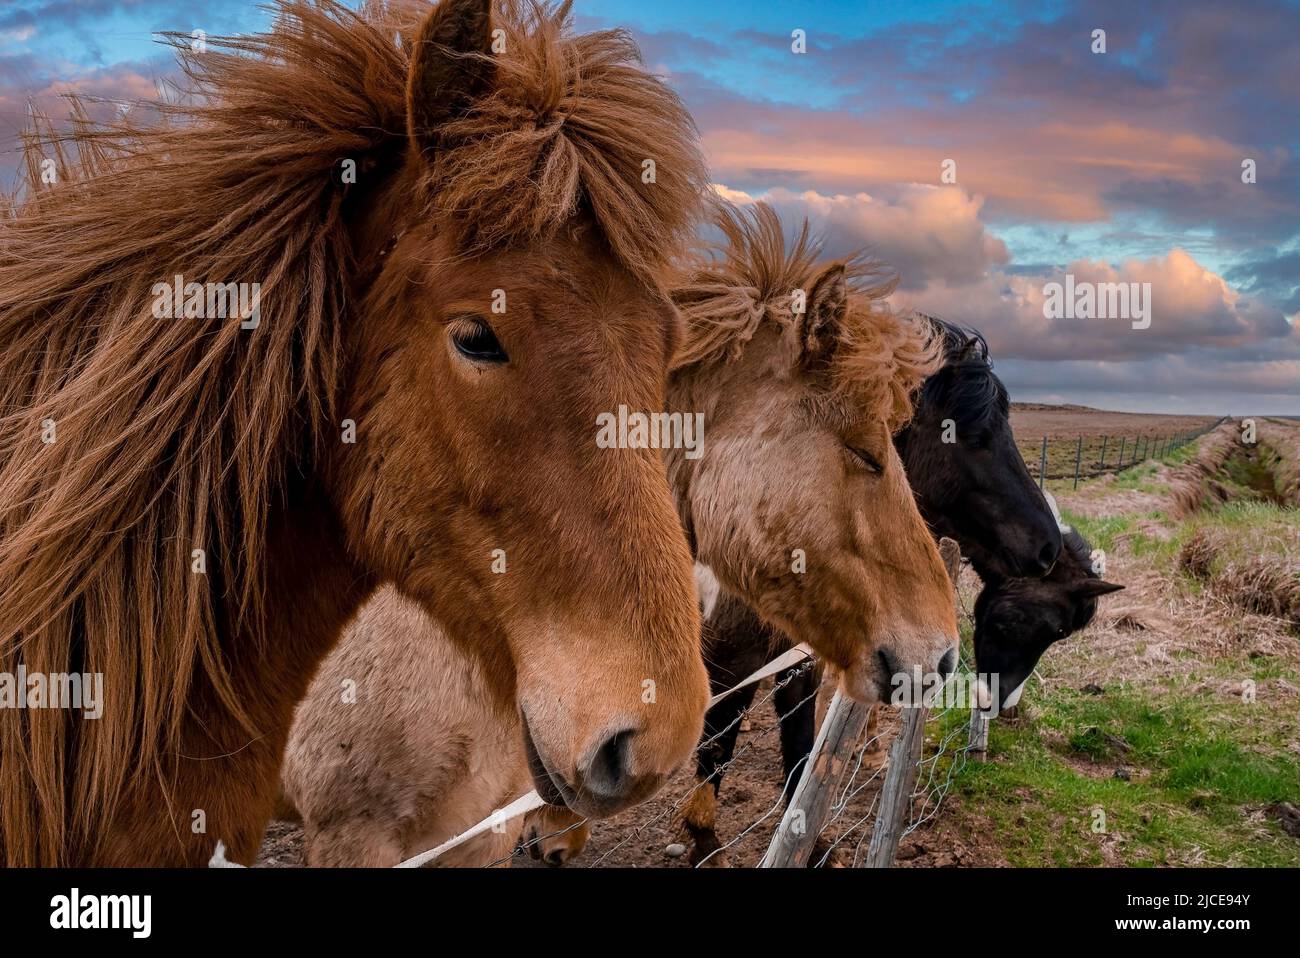 Close-up of Icelandic horses standing near fence against cloudy sky at sunset Stock Photo